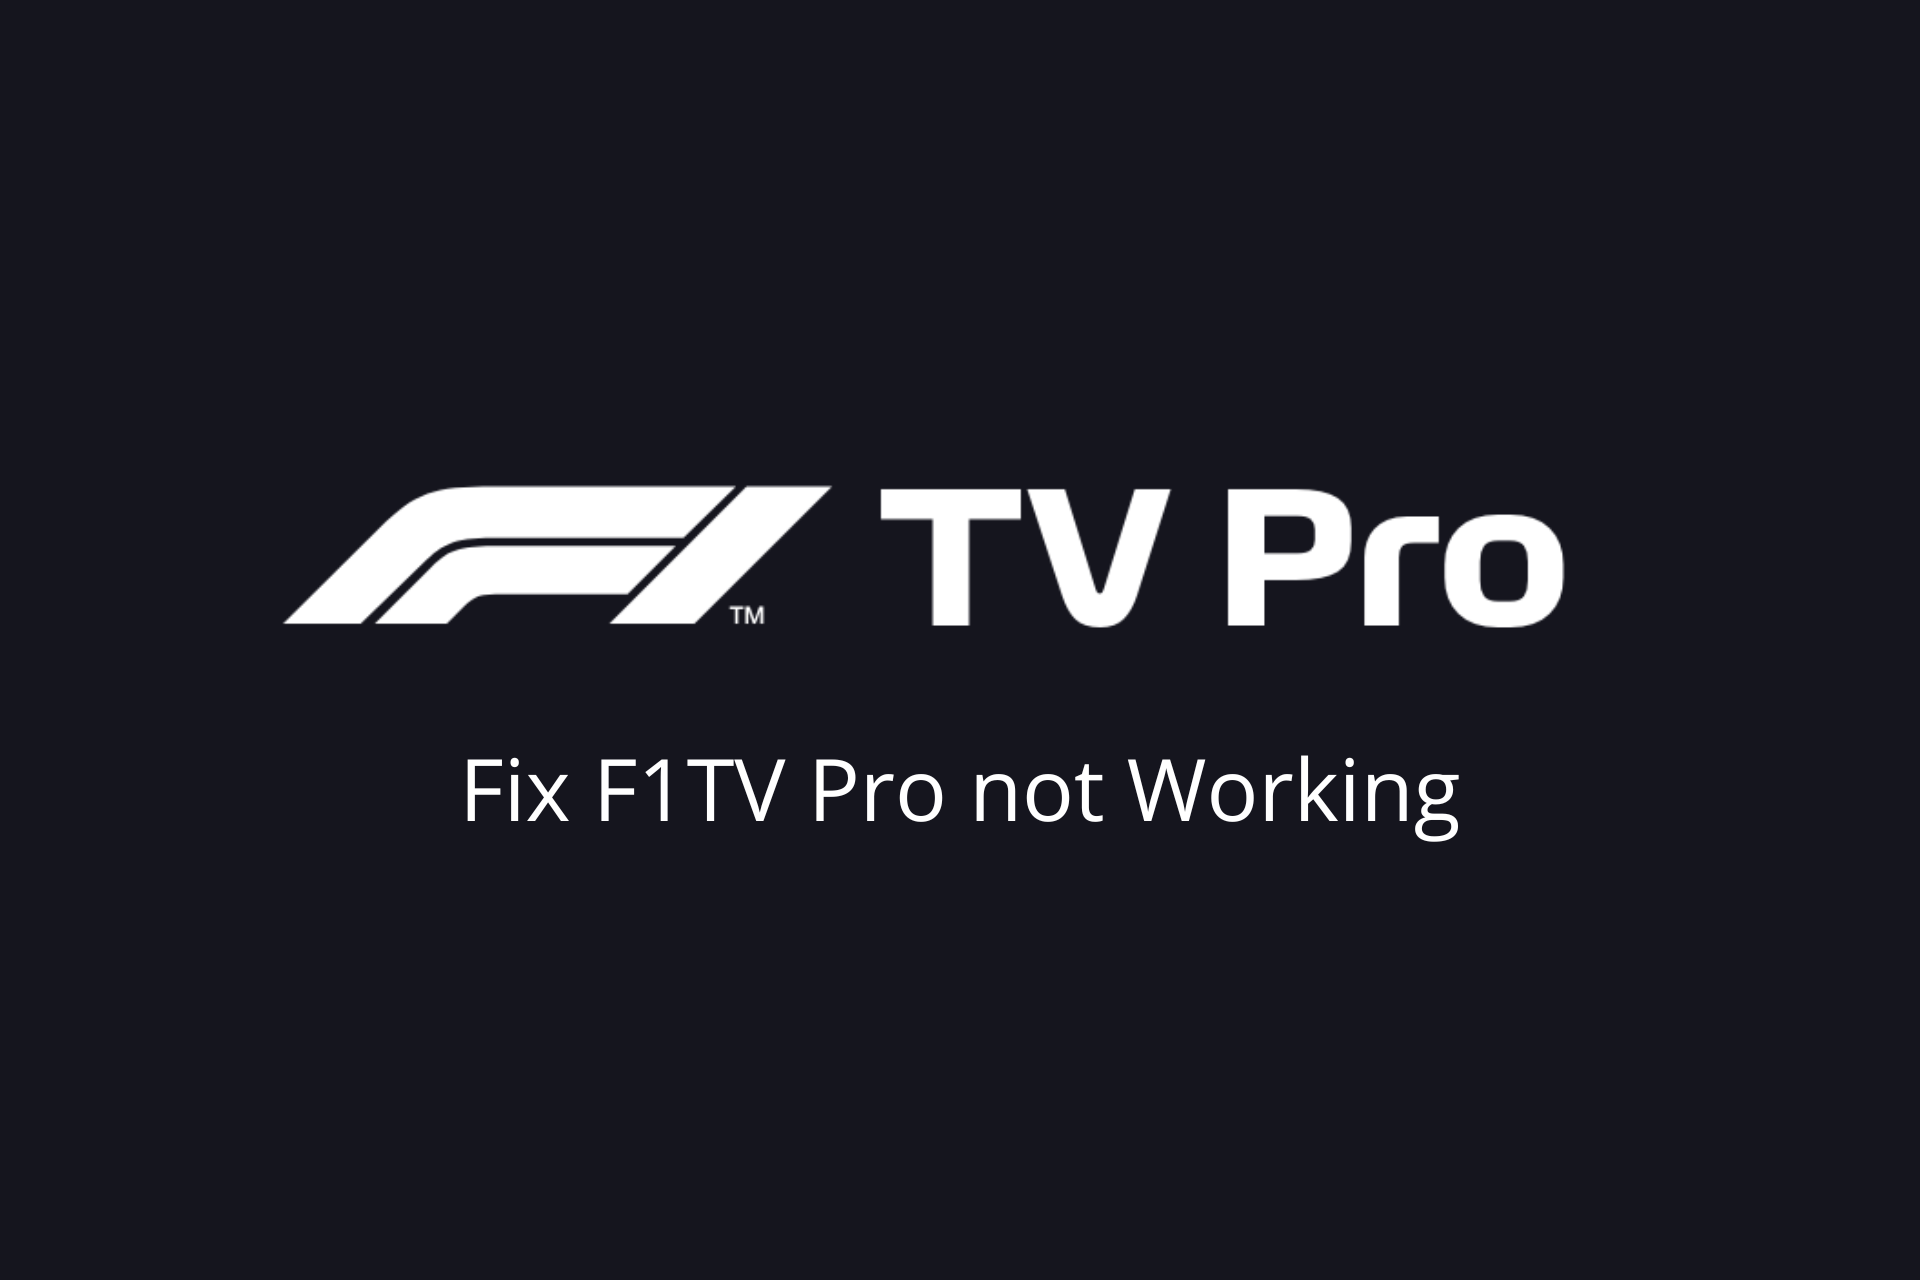 F1TV Pro not working